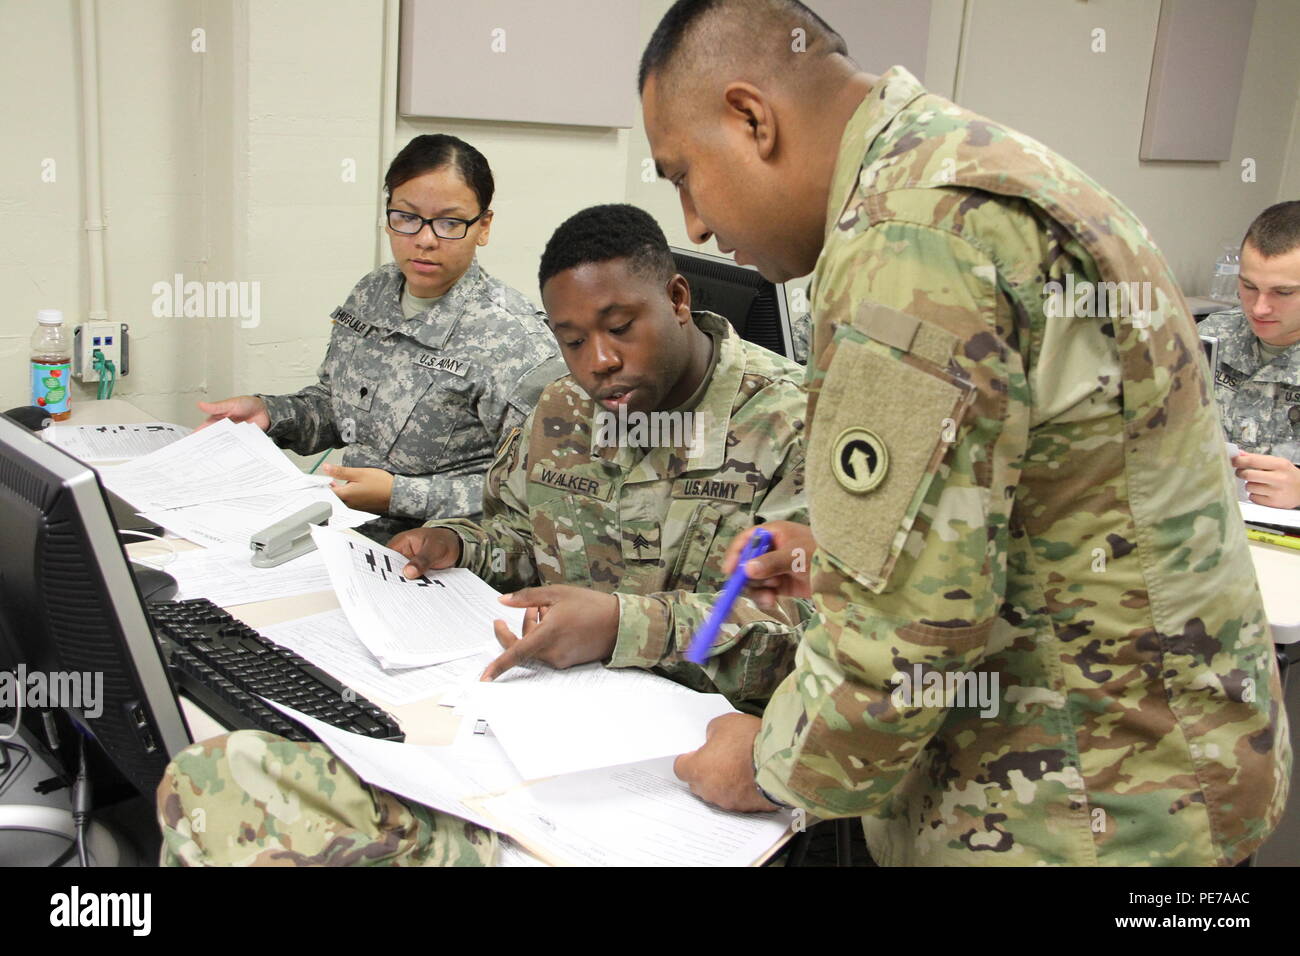 Staff Sgt. Pedro Torres, right, accounting section noncommissioned officer in charge, 18th Financial Management Support Center, 1st Sustainment Command (Theater), gives instructions to Sgt. Hassan Walker, middle, commercial vendor services analyst, and Spc. Kenya Huguley, left, commercial vendor services technician, during a certification exercise Oct. 26 led by U.S. Army Financial Management Command at the XVIII Airborne Corps Headquarters at Fort Bragg, N.C. Stock Photo